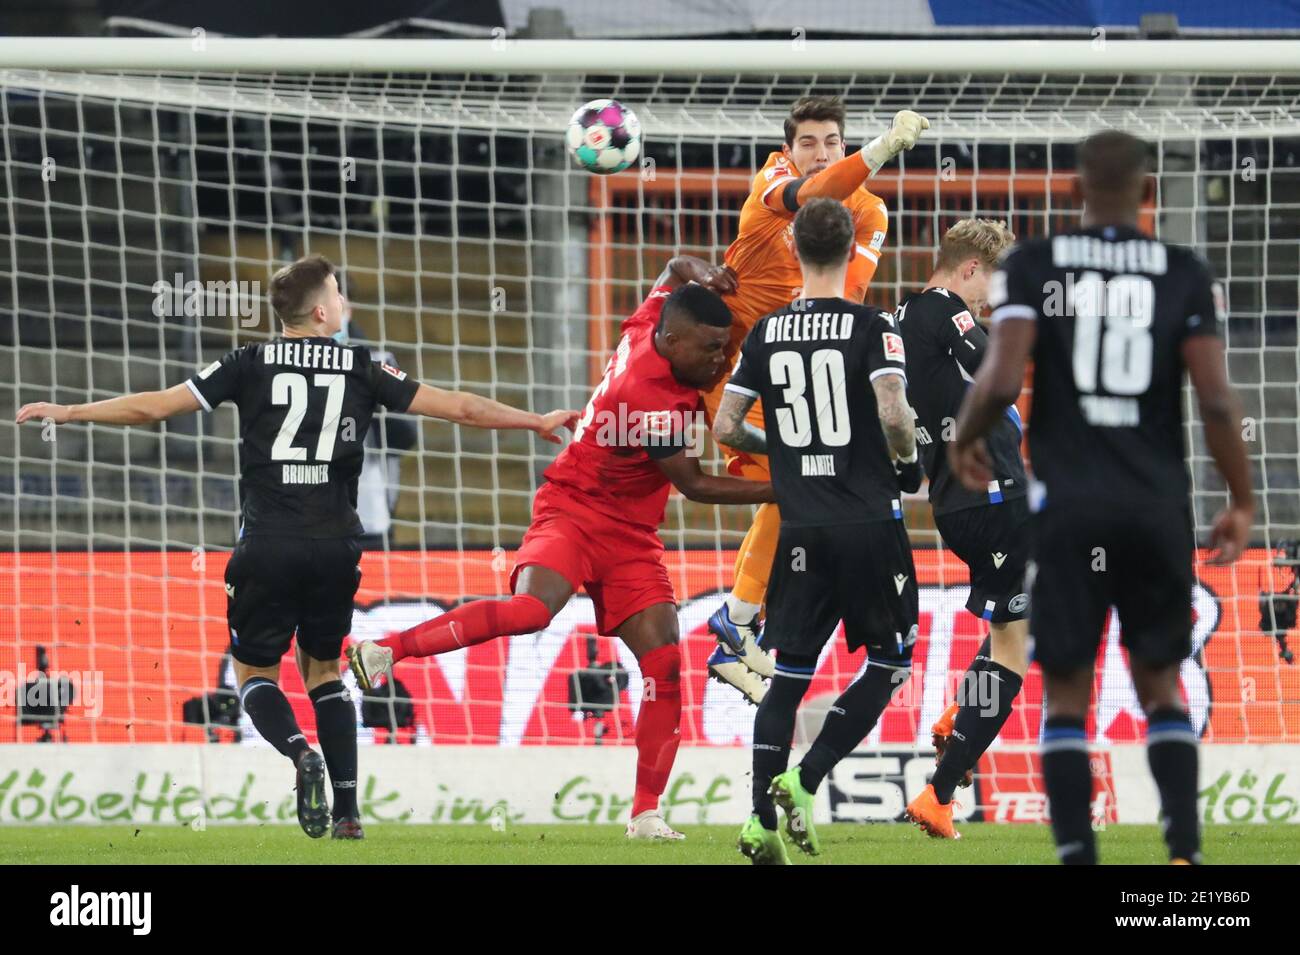 10 January 2021, North Rhine-Westphalia, Bielefeld: Football: Bundesliga, Arminia Bielefeld - Hertha BSC Berlin, Matchday 15 at Schüco Arena. Bielefeld's goalkeeper Stefan Ortega (top) battles for the ball with Berlin's Jhon Cordoba (M, left). Cedric Brunner (l) and Marcel Hartel (M, right) look on. Photo: Friso Gentsch/dpa - IMPORTANT NOTE: In accordance with the regulations of the DFL Deutsche Fußball Liga and/or the DFB Deutscher Fußball-Bund, it is prohibited to use or have used photographs taken in the stadium and/or of the match in the form of sequence pictures and/or video-like photo se Stock Photo